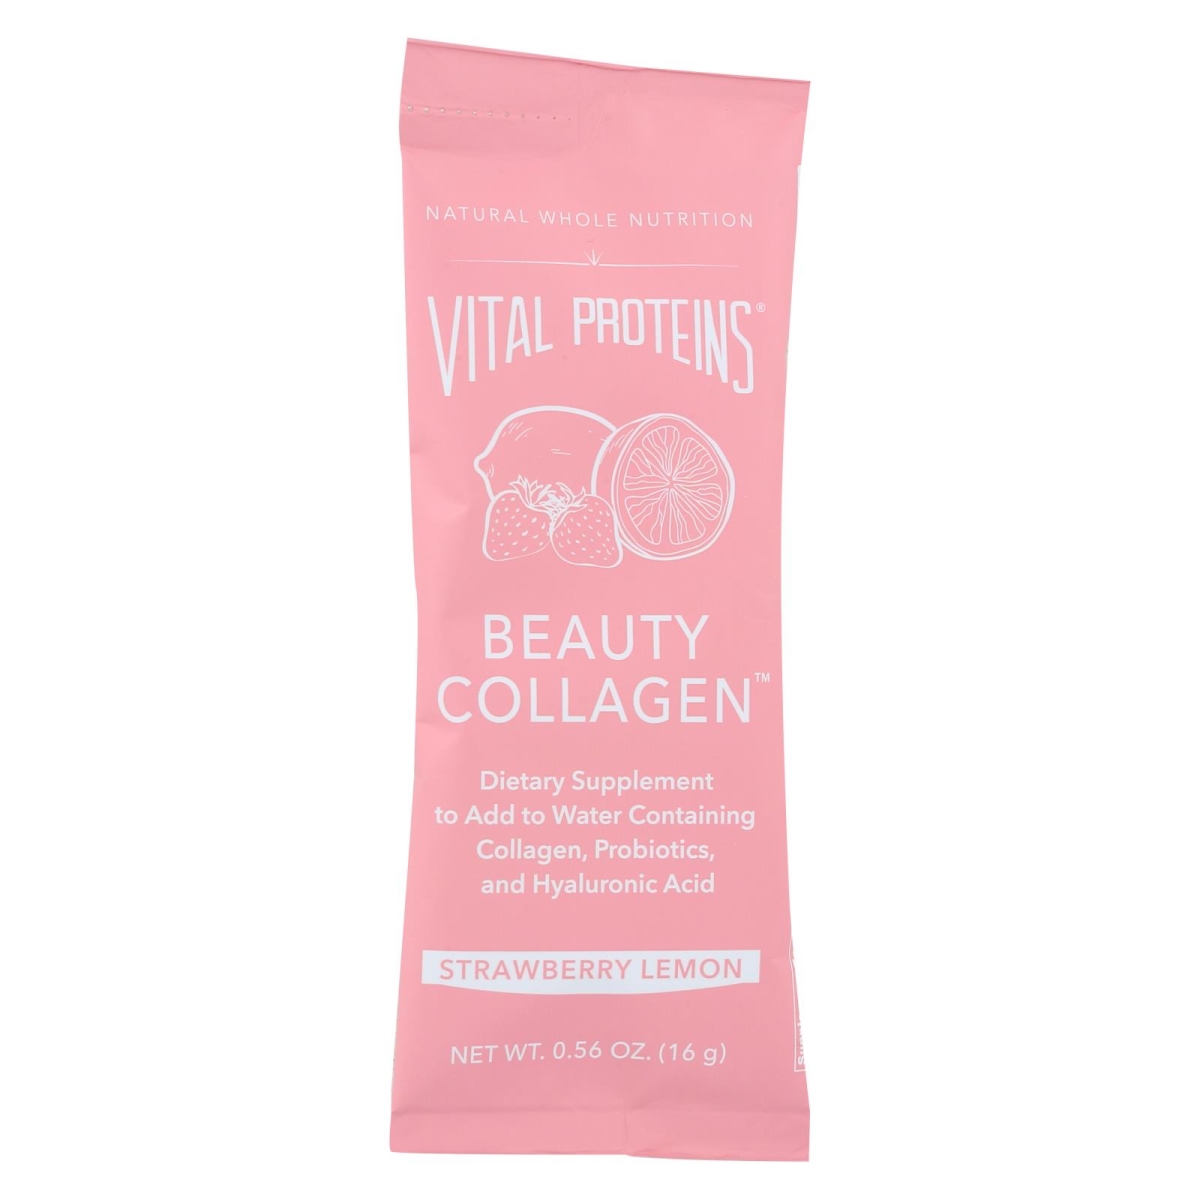 Picture of Vital Proteins HG2244291 0.56 oz Collagen Strawberry Lemon Beauty Dietary Supplement - Case of 14